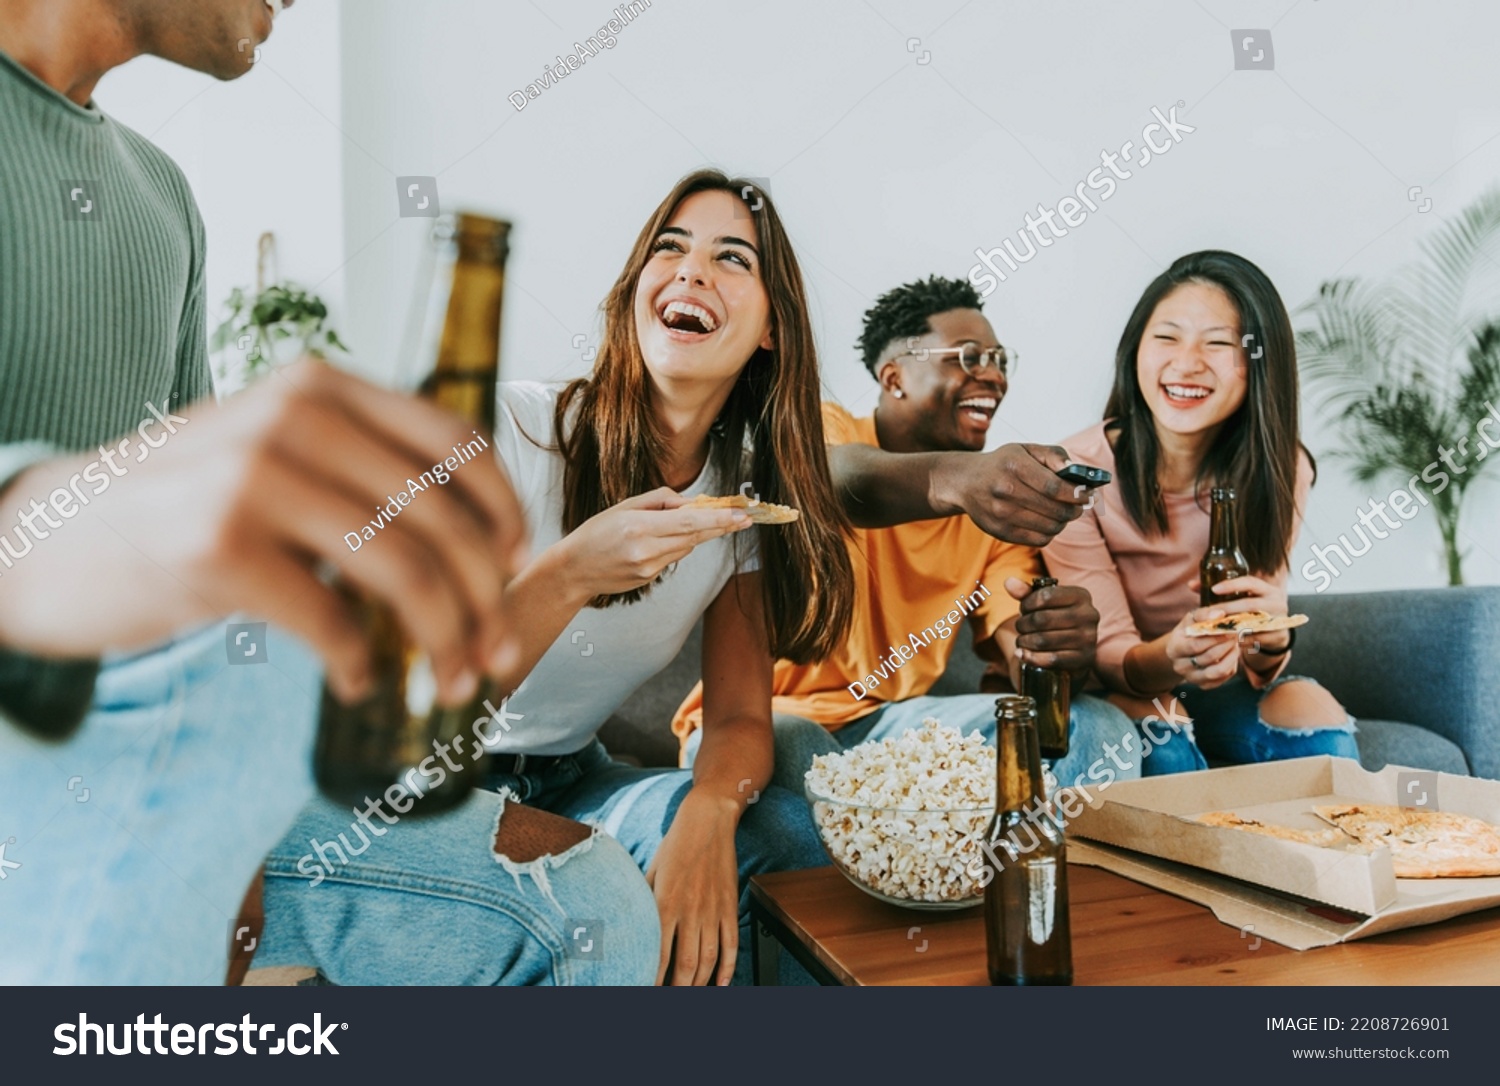 Group of friends watching tv and eating pizza - Multiracial cheerful young people having weekend home party together - Happy students having fun in university rooms - Youth lifestyle and food concept #2208726901